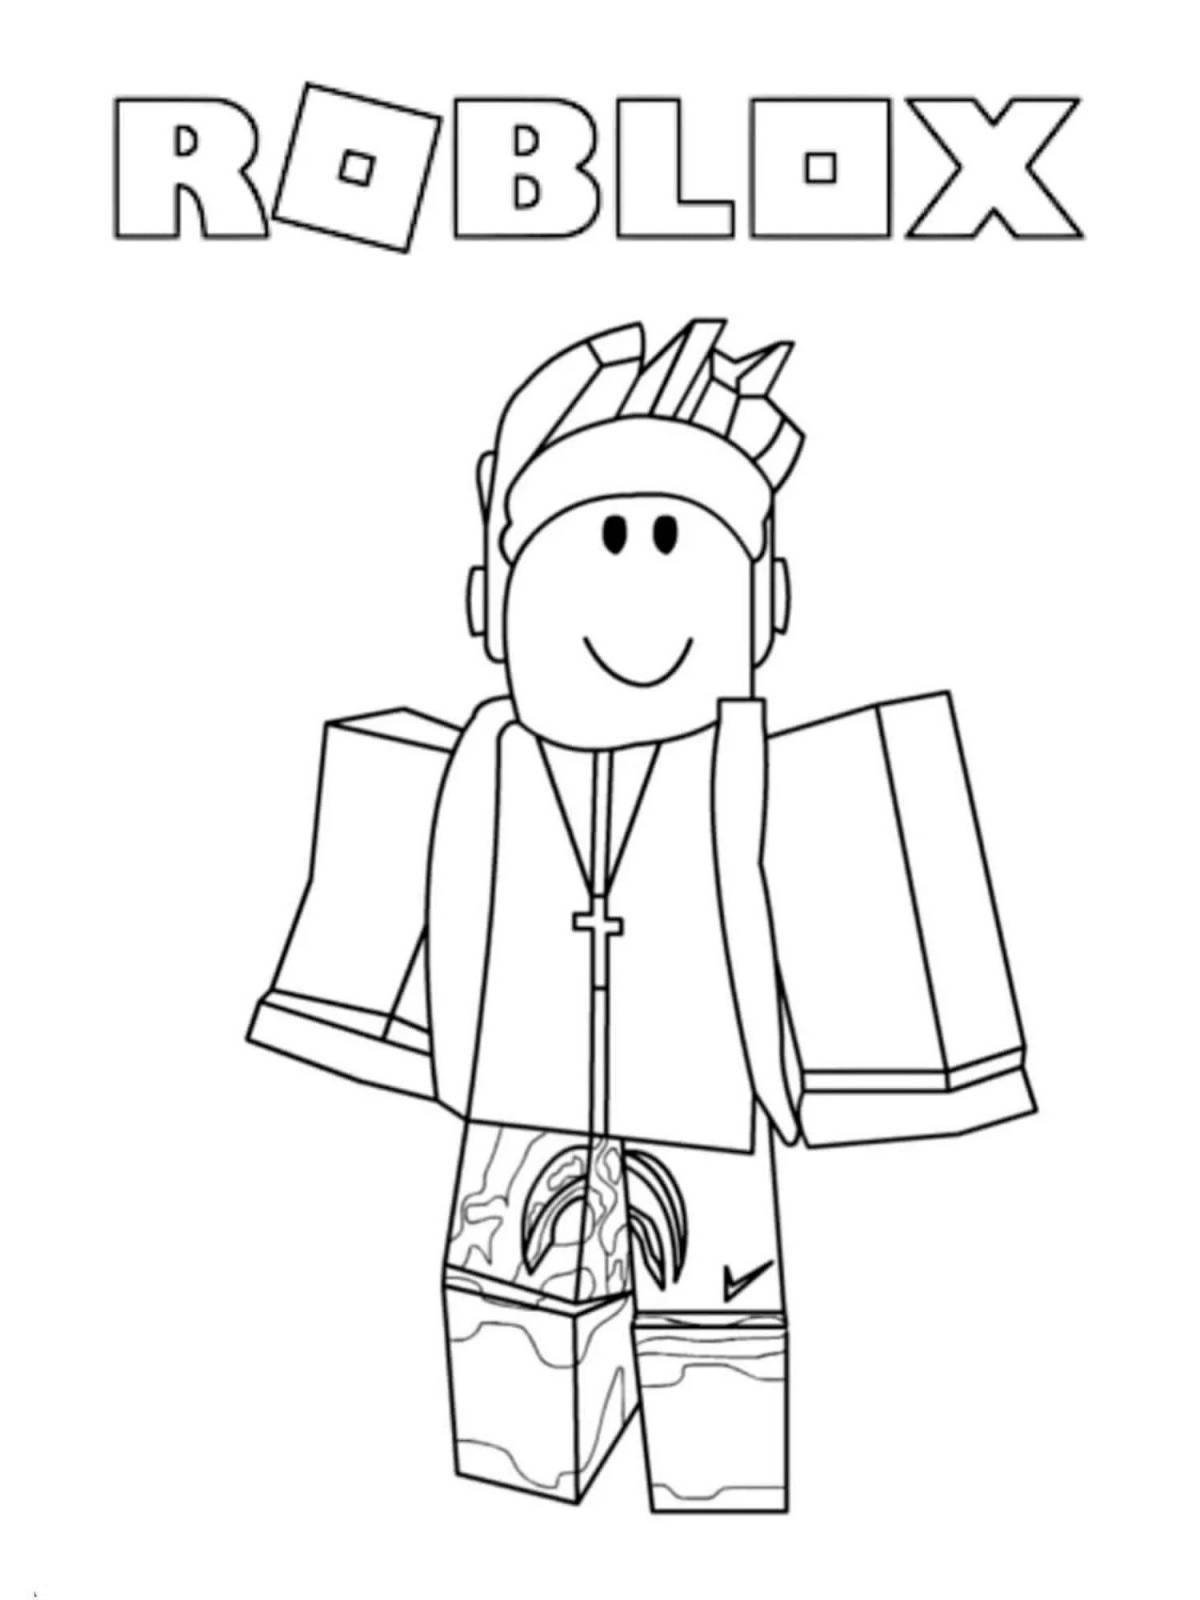 Fancy roblox coloring book for girls